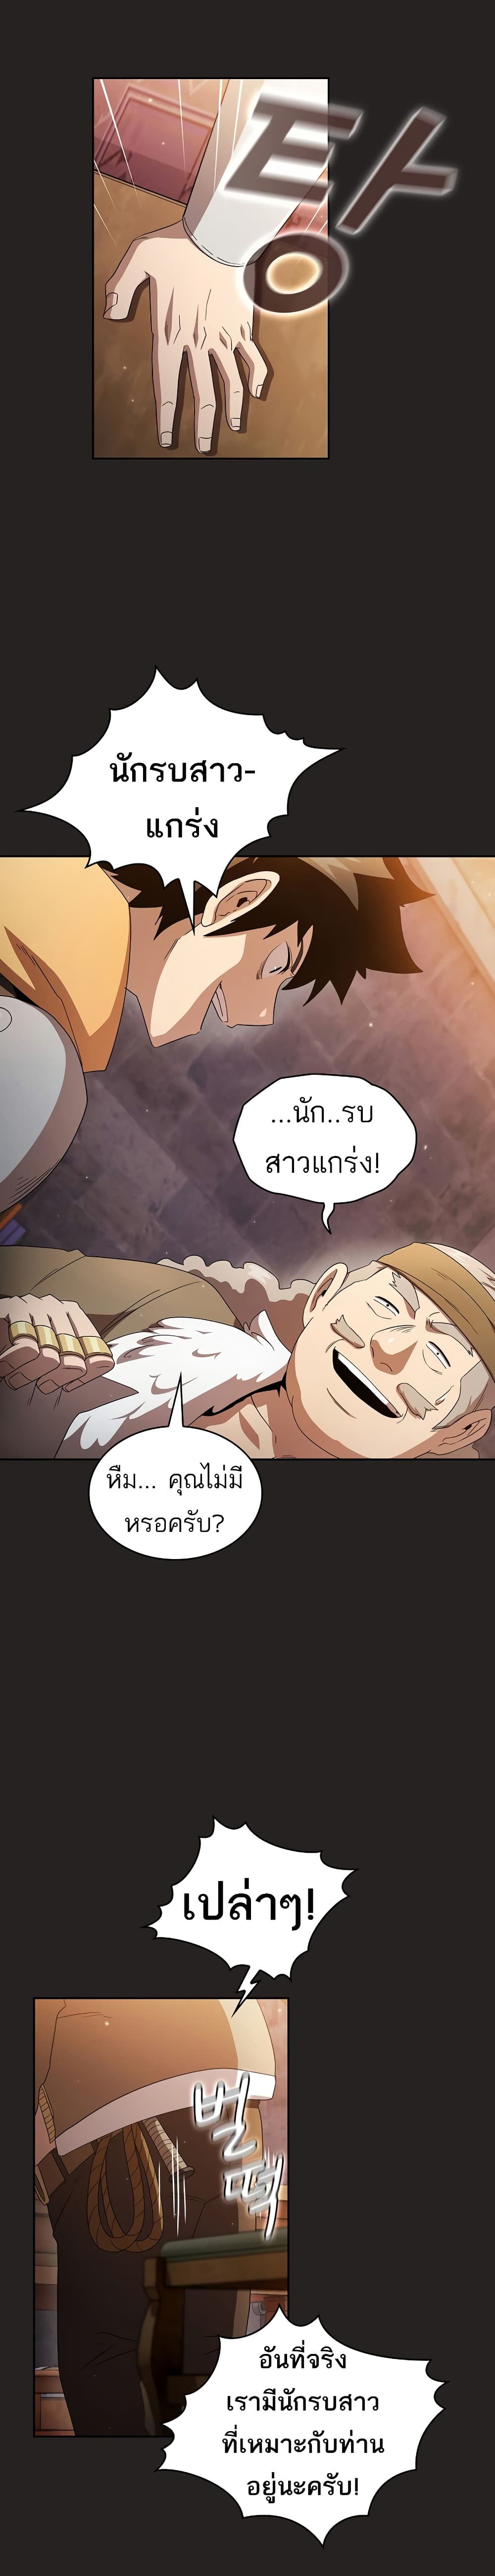 Is This Hero for Real à¸à¸­à¸à¸à¸µà¹ 31 (5)